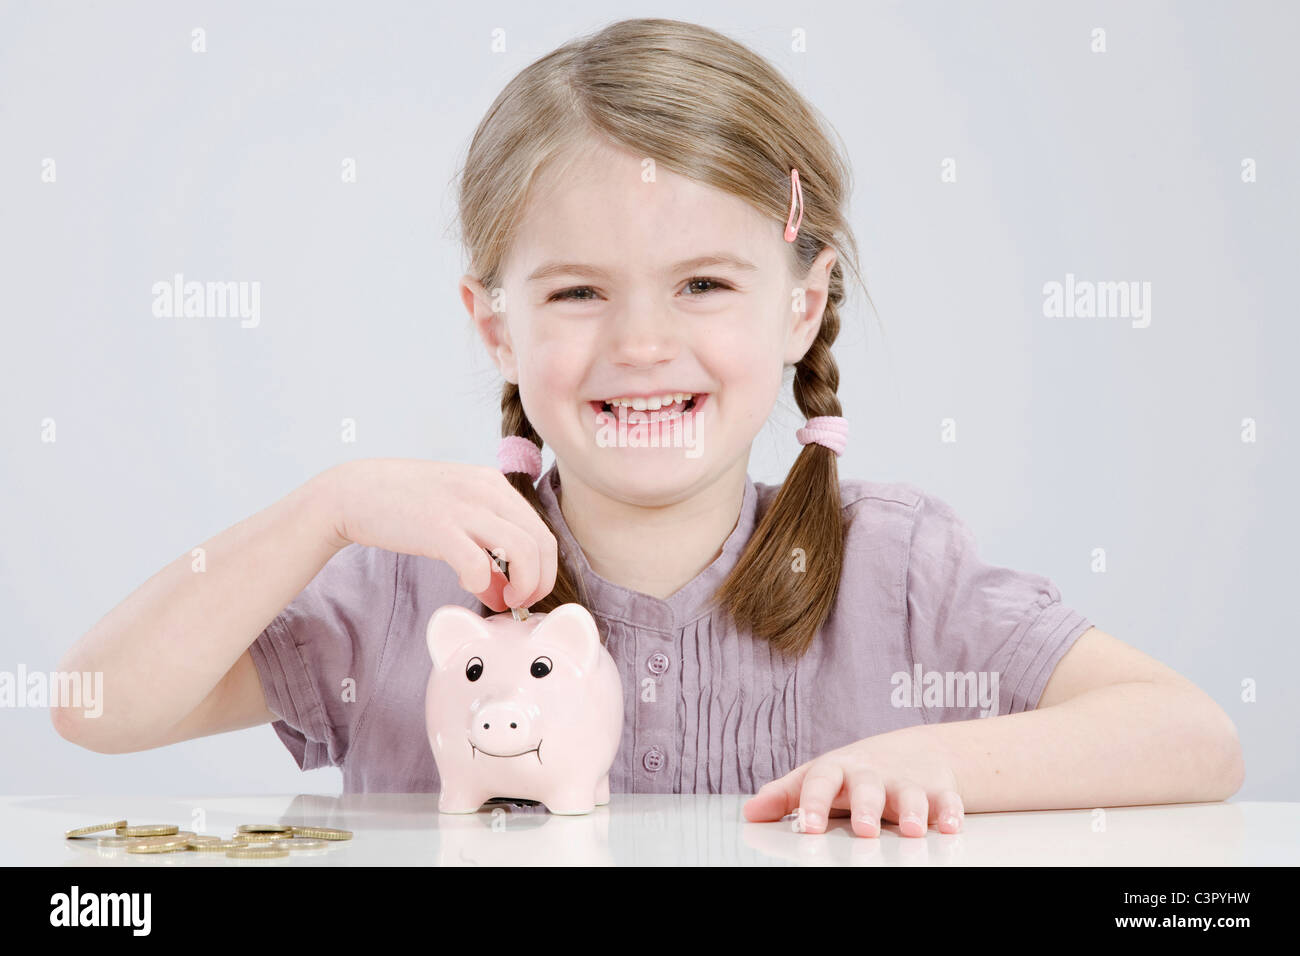 Girl (4-5) putting coin into piggy bank, smiling, portrait Stock Photo